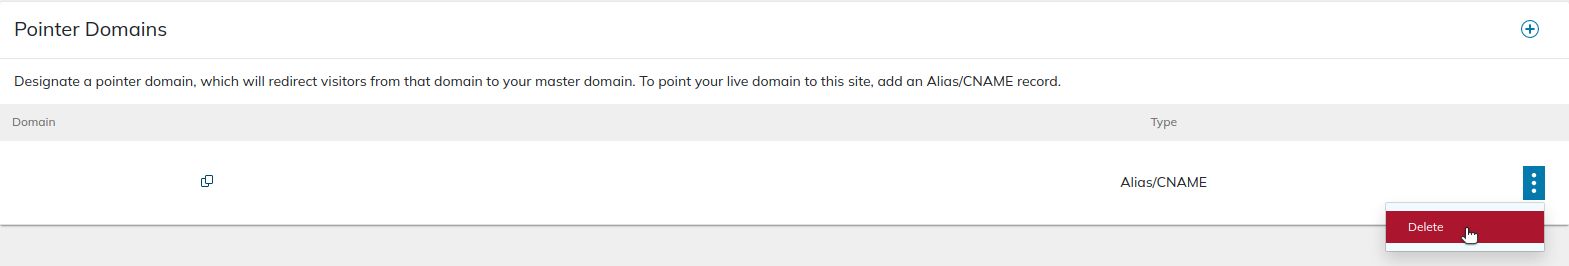 Click the Submit button, and the new pointer domain will be added to your website. You can delete an existing parked domain by clicking the three dots on the right and choosing Delete.